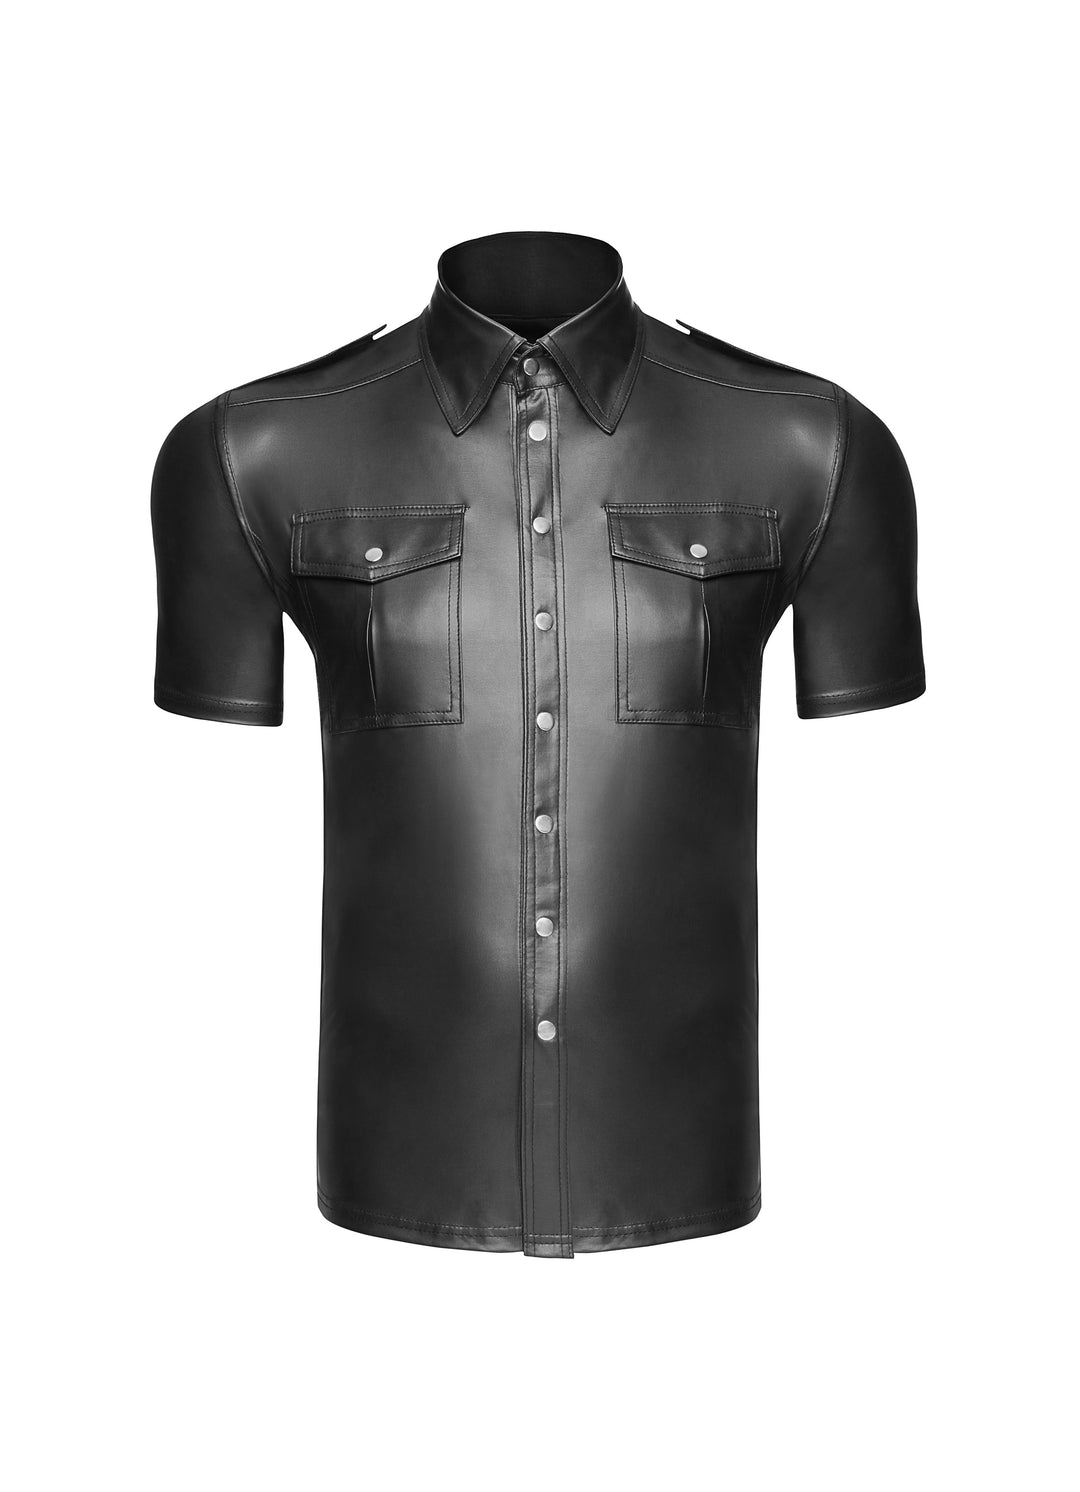 Mens Collared shirt with front pockets